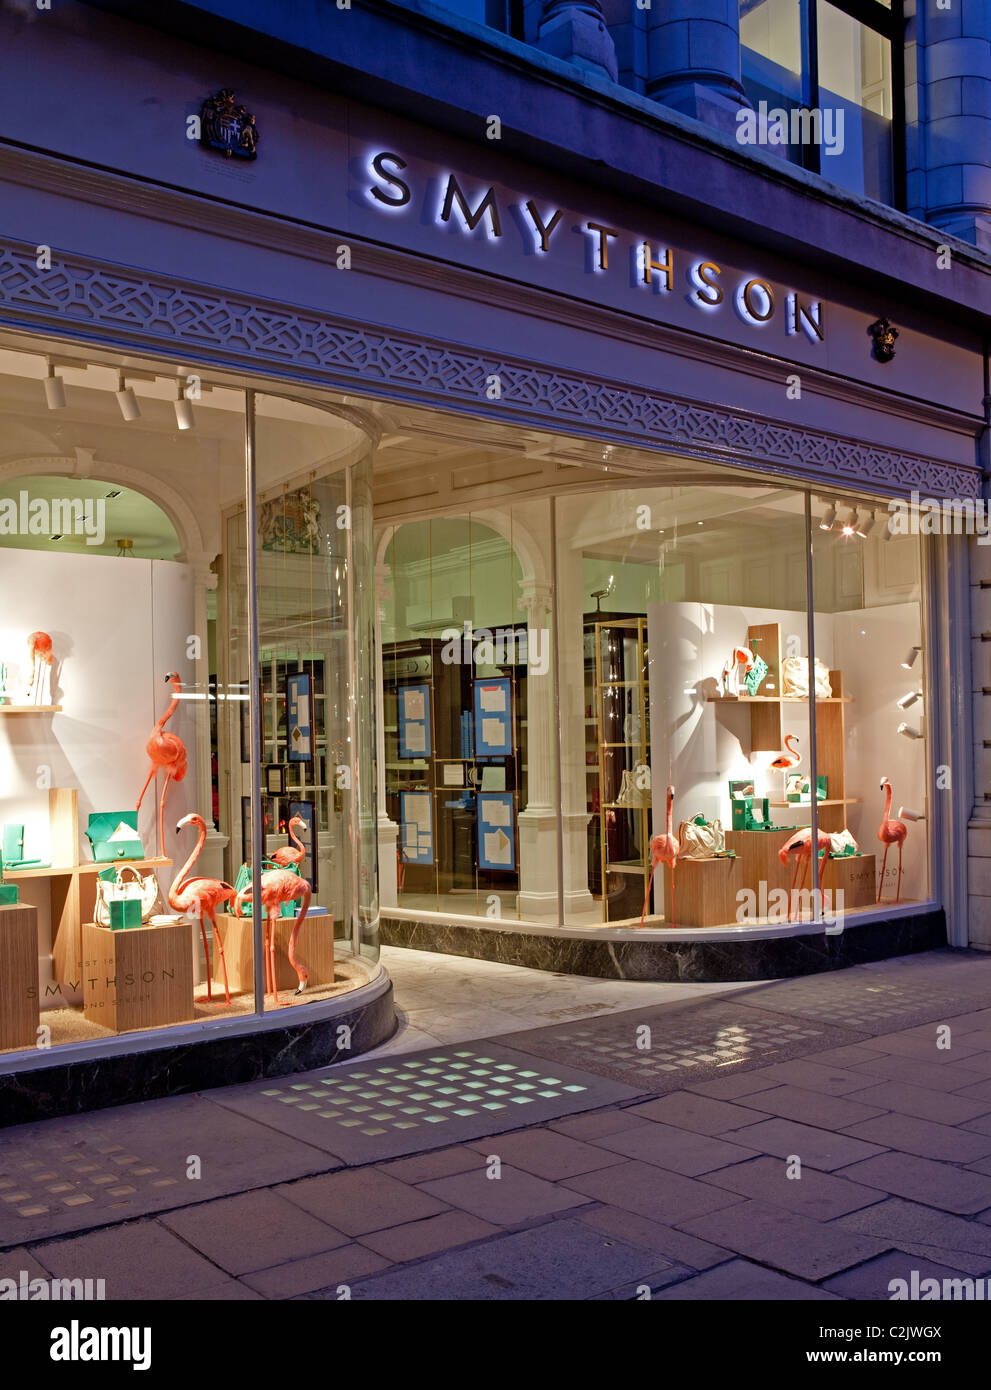 Symthson store in London in the evening Stock Photo